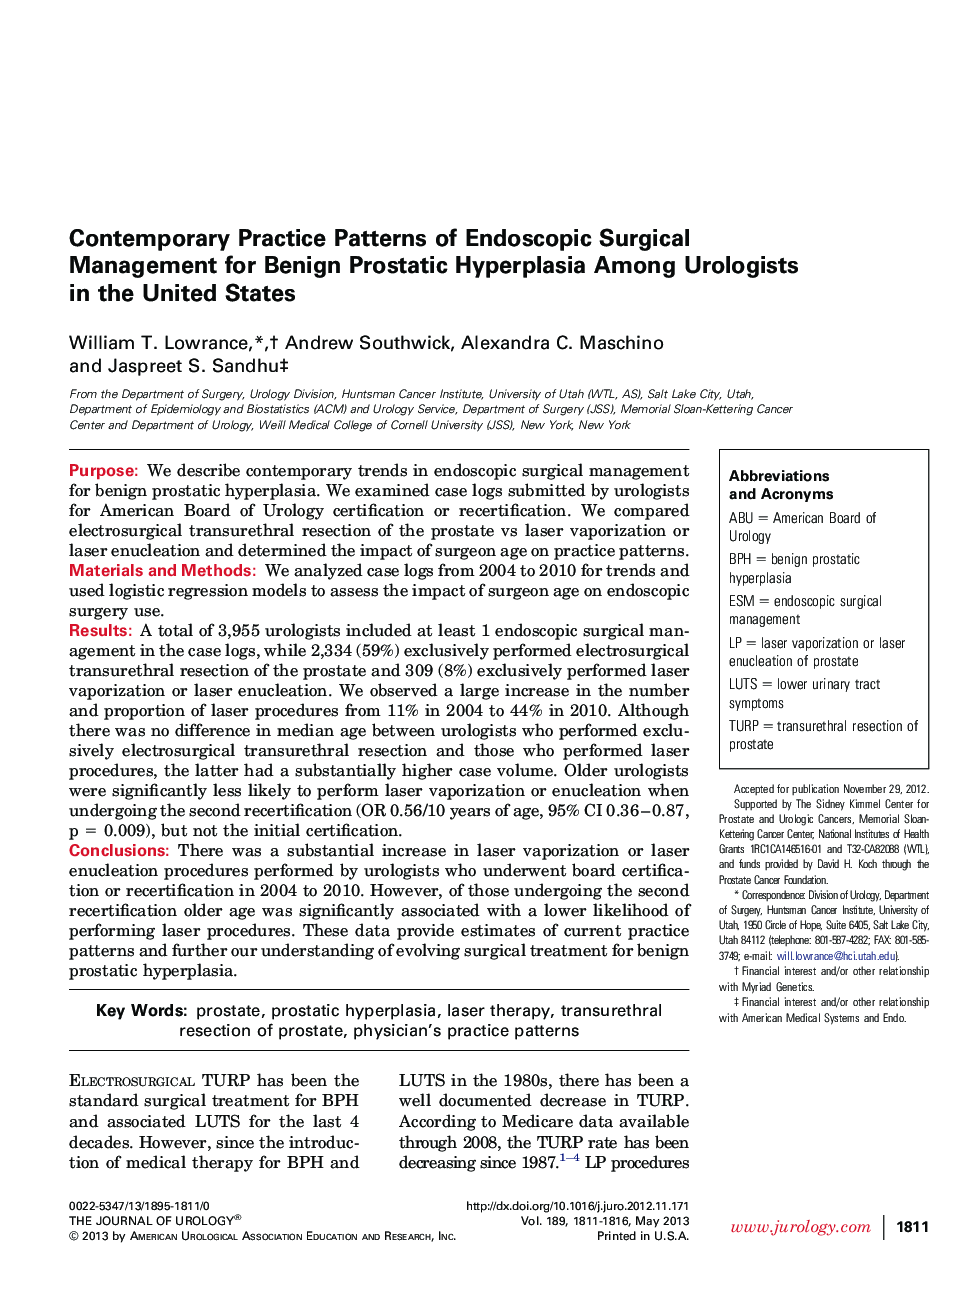 Contemporary Practice Patterns of Endoscopic Surgical Management for Benign Prostatic Hyperplasia Among Urologists in the United States 